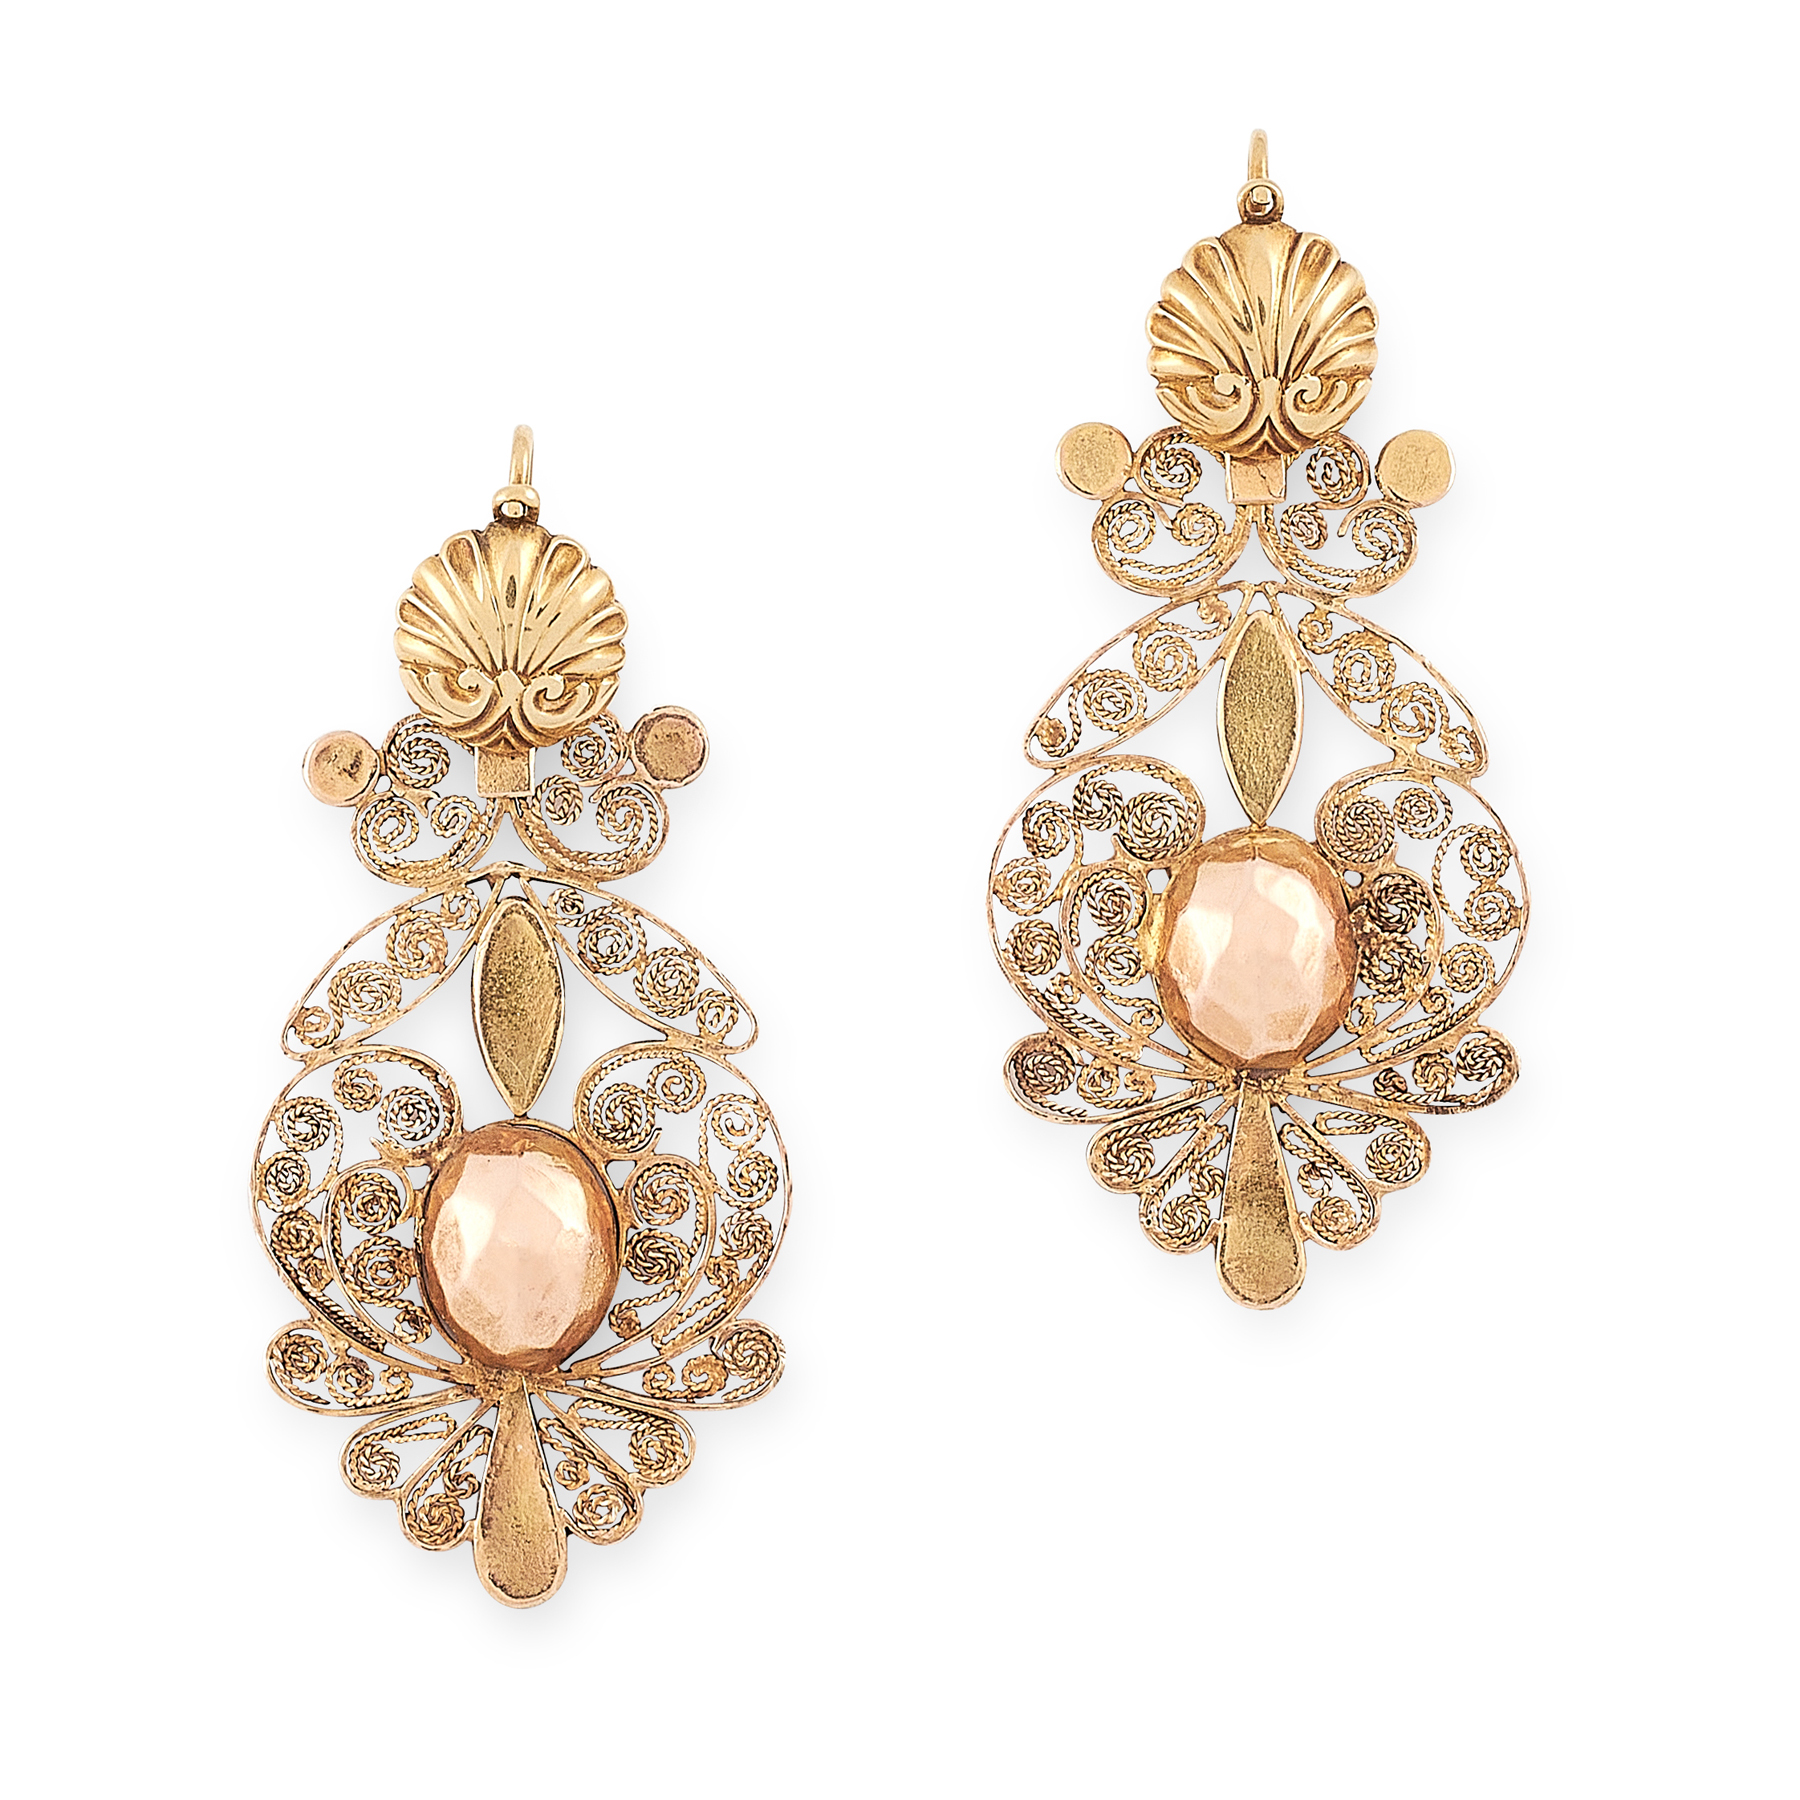 A PAIR OF ANTIQUE DROP EARRINGS, 19TH CENTURY in yellow gold, each formed of a foliate body with